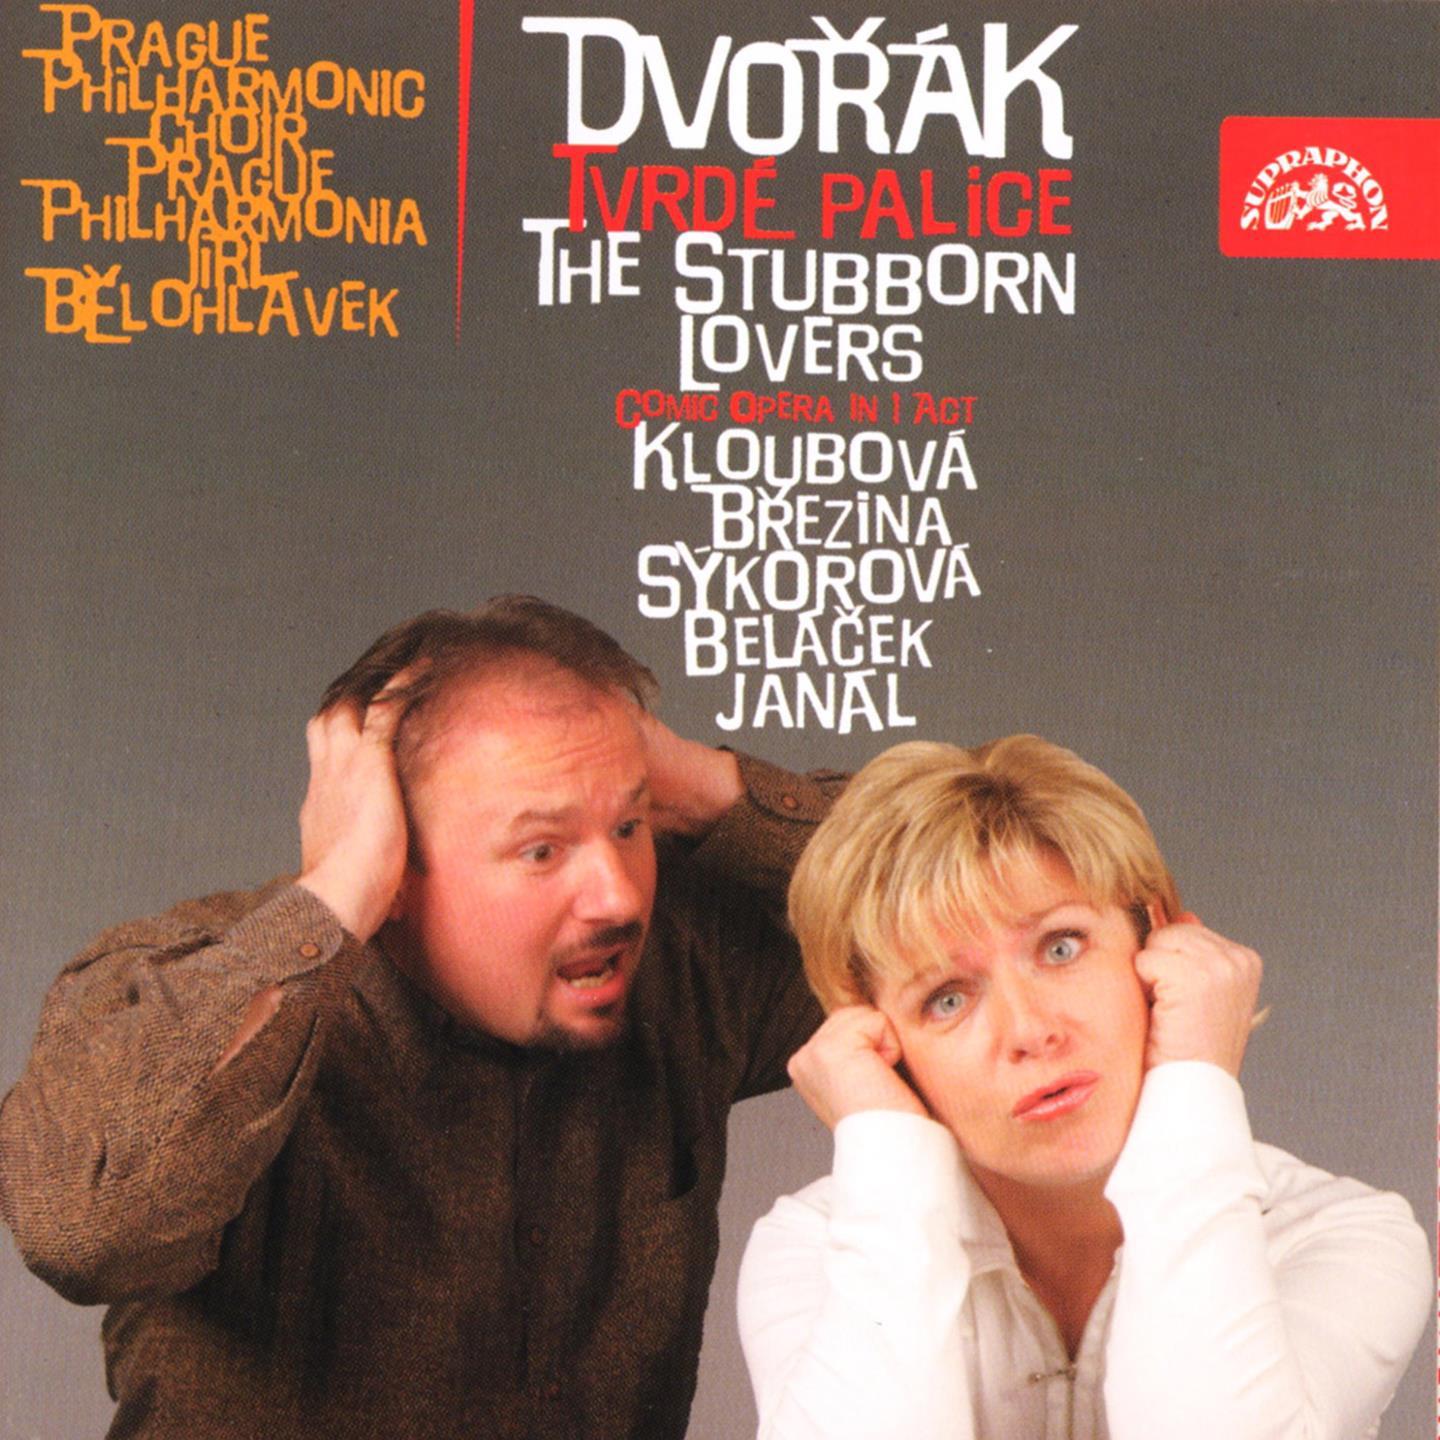 The Stubborn Lovers, Op. 17, B. 46, Act I: Overture